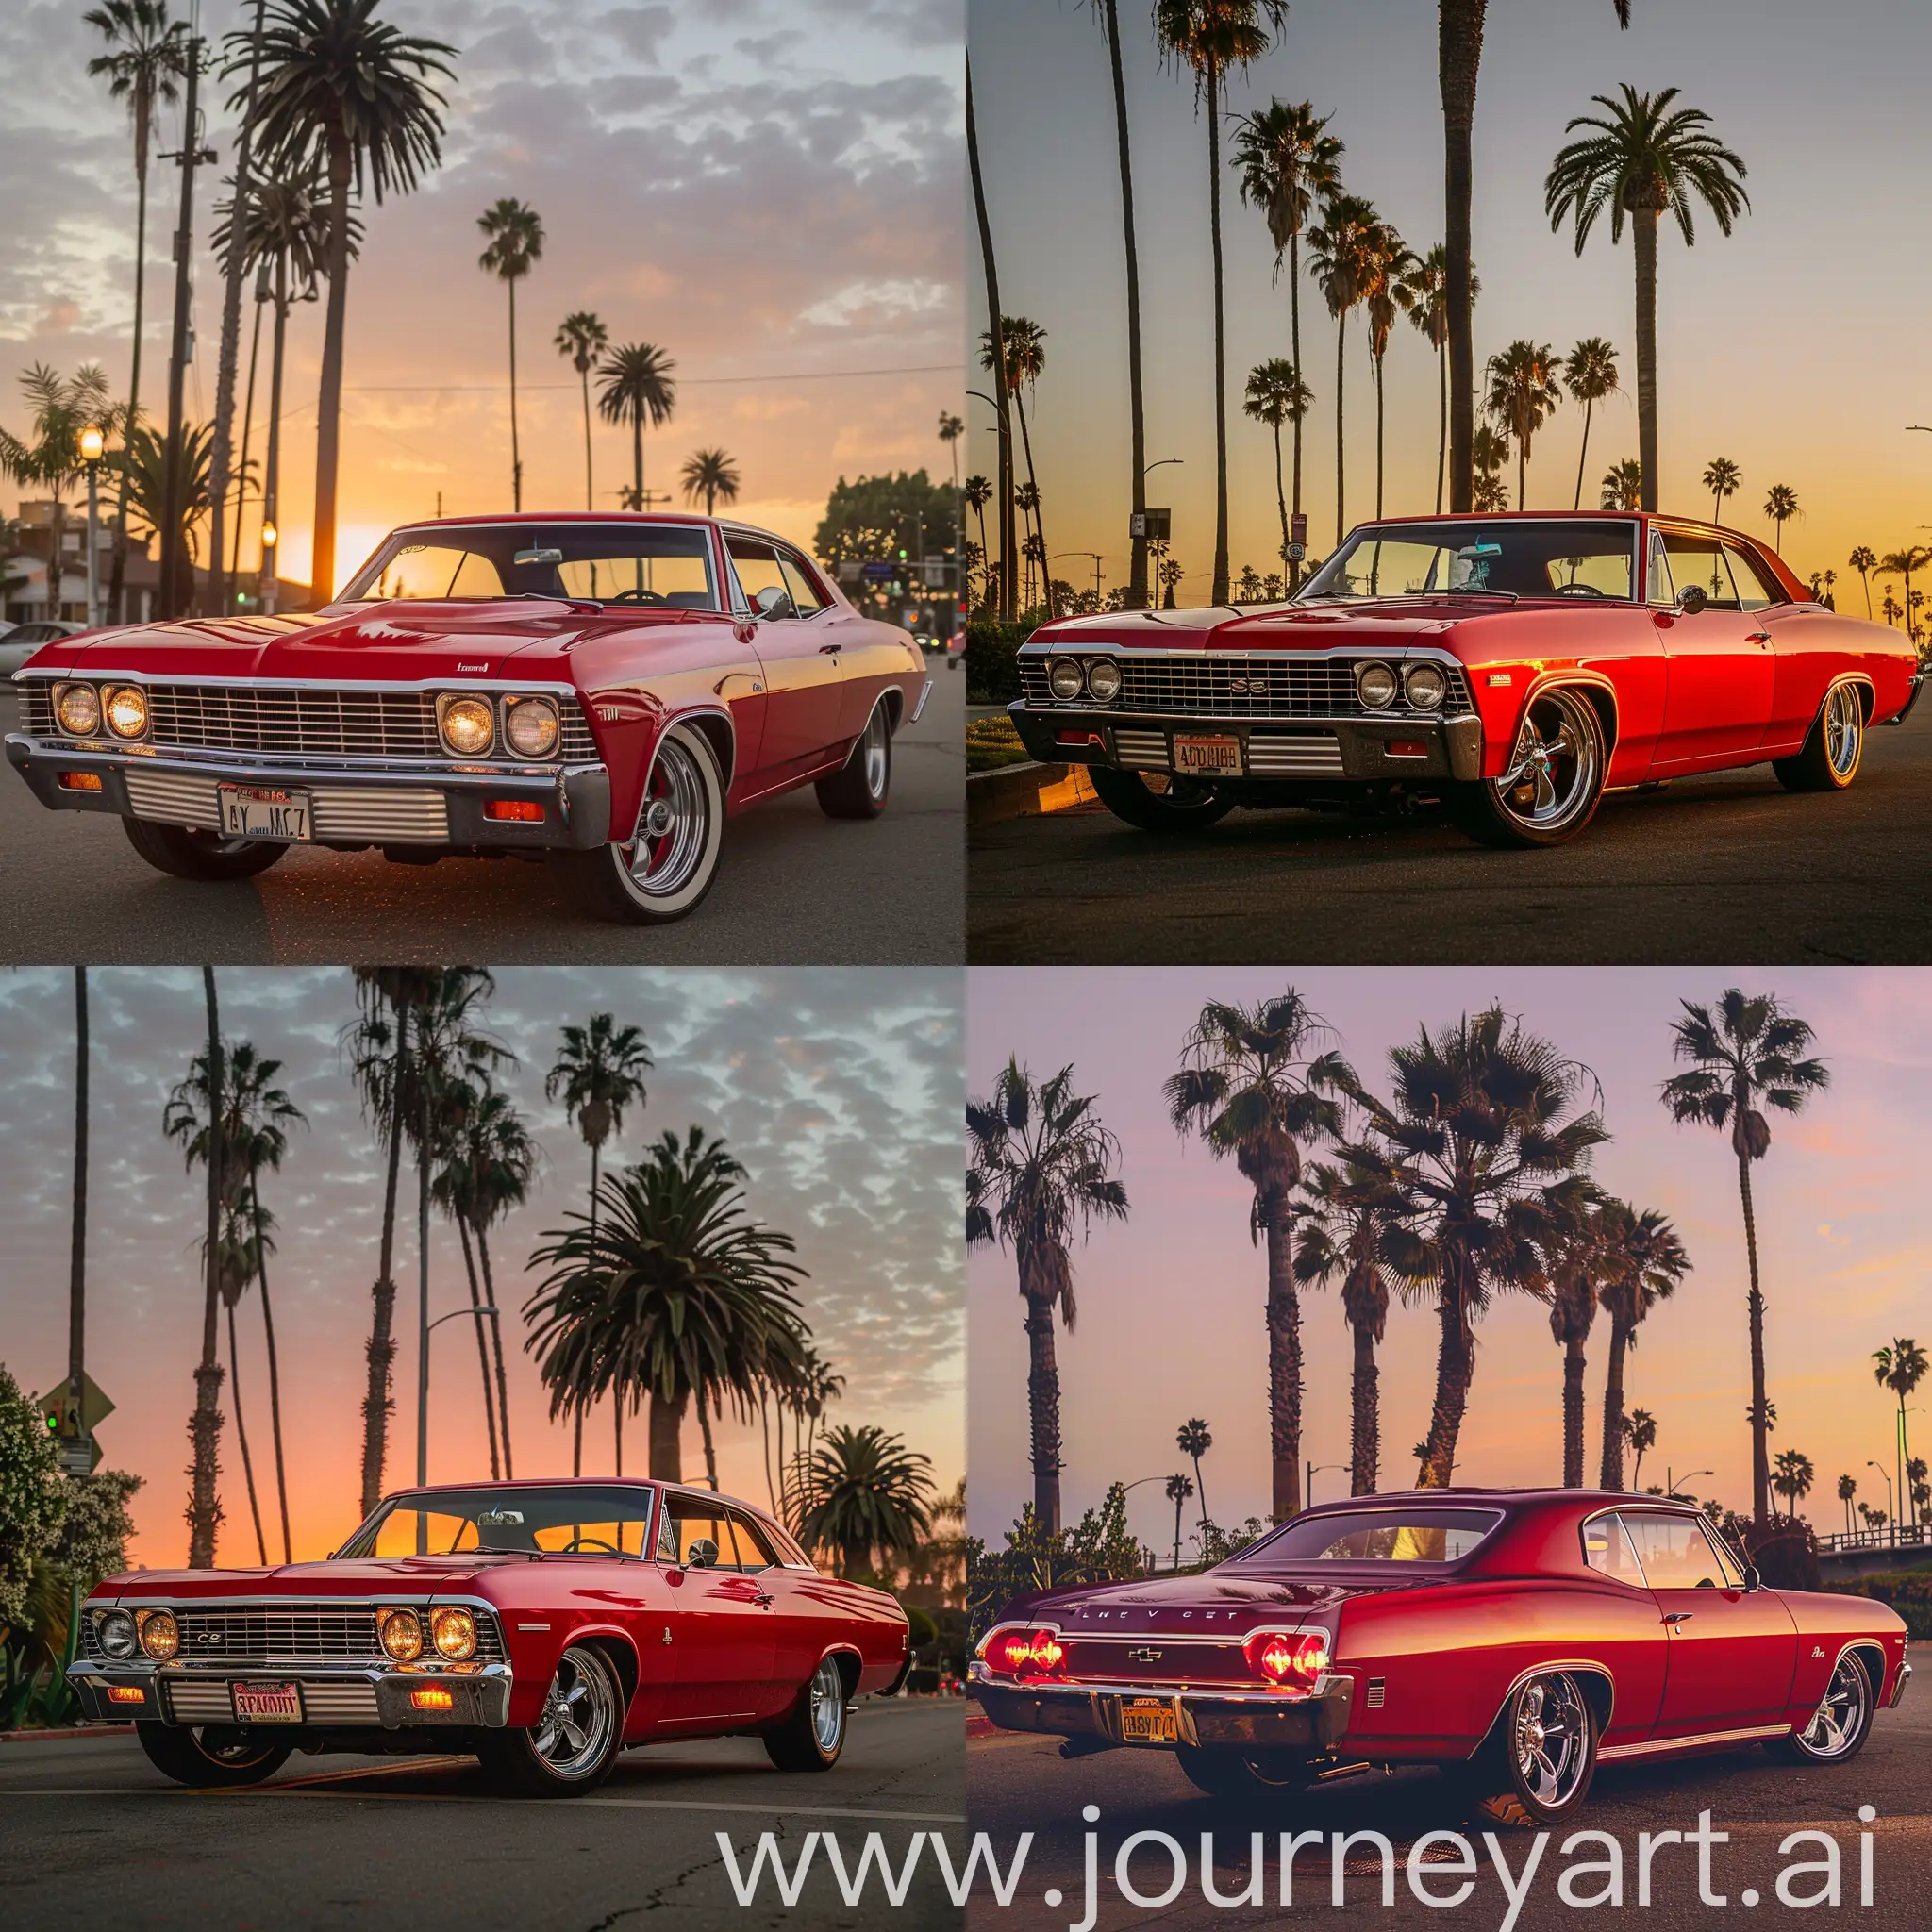 1969 Chevrolet Impala, candy red paint, California sunset, palm trees, warm urban style, muted urban color grading, slightly grainy street photography